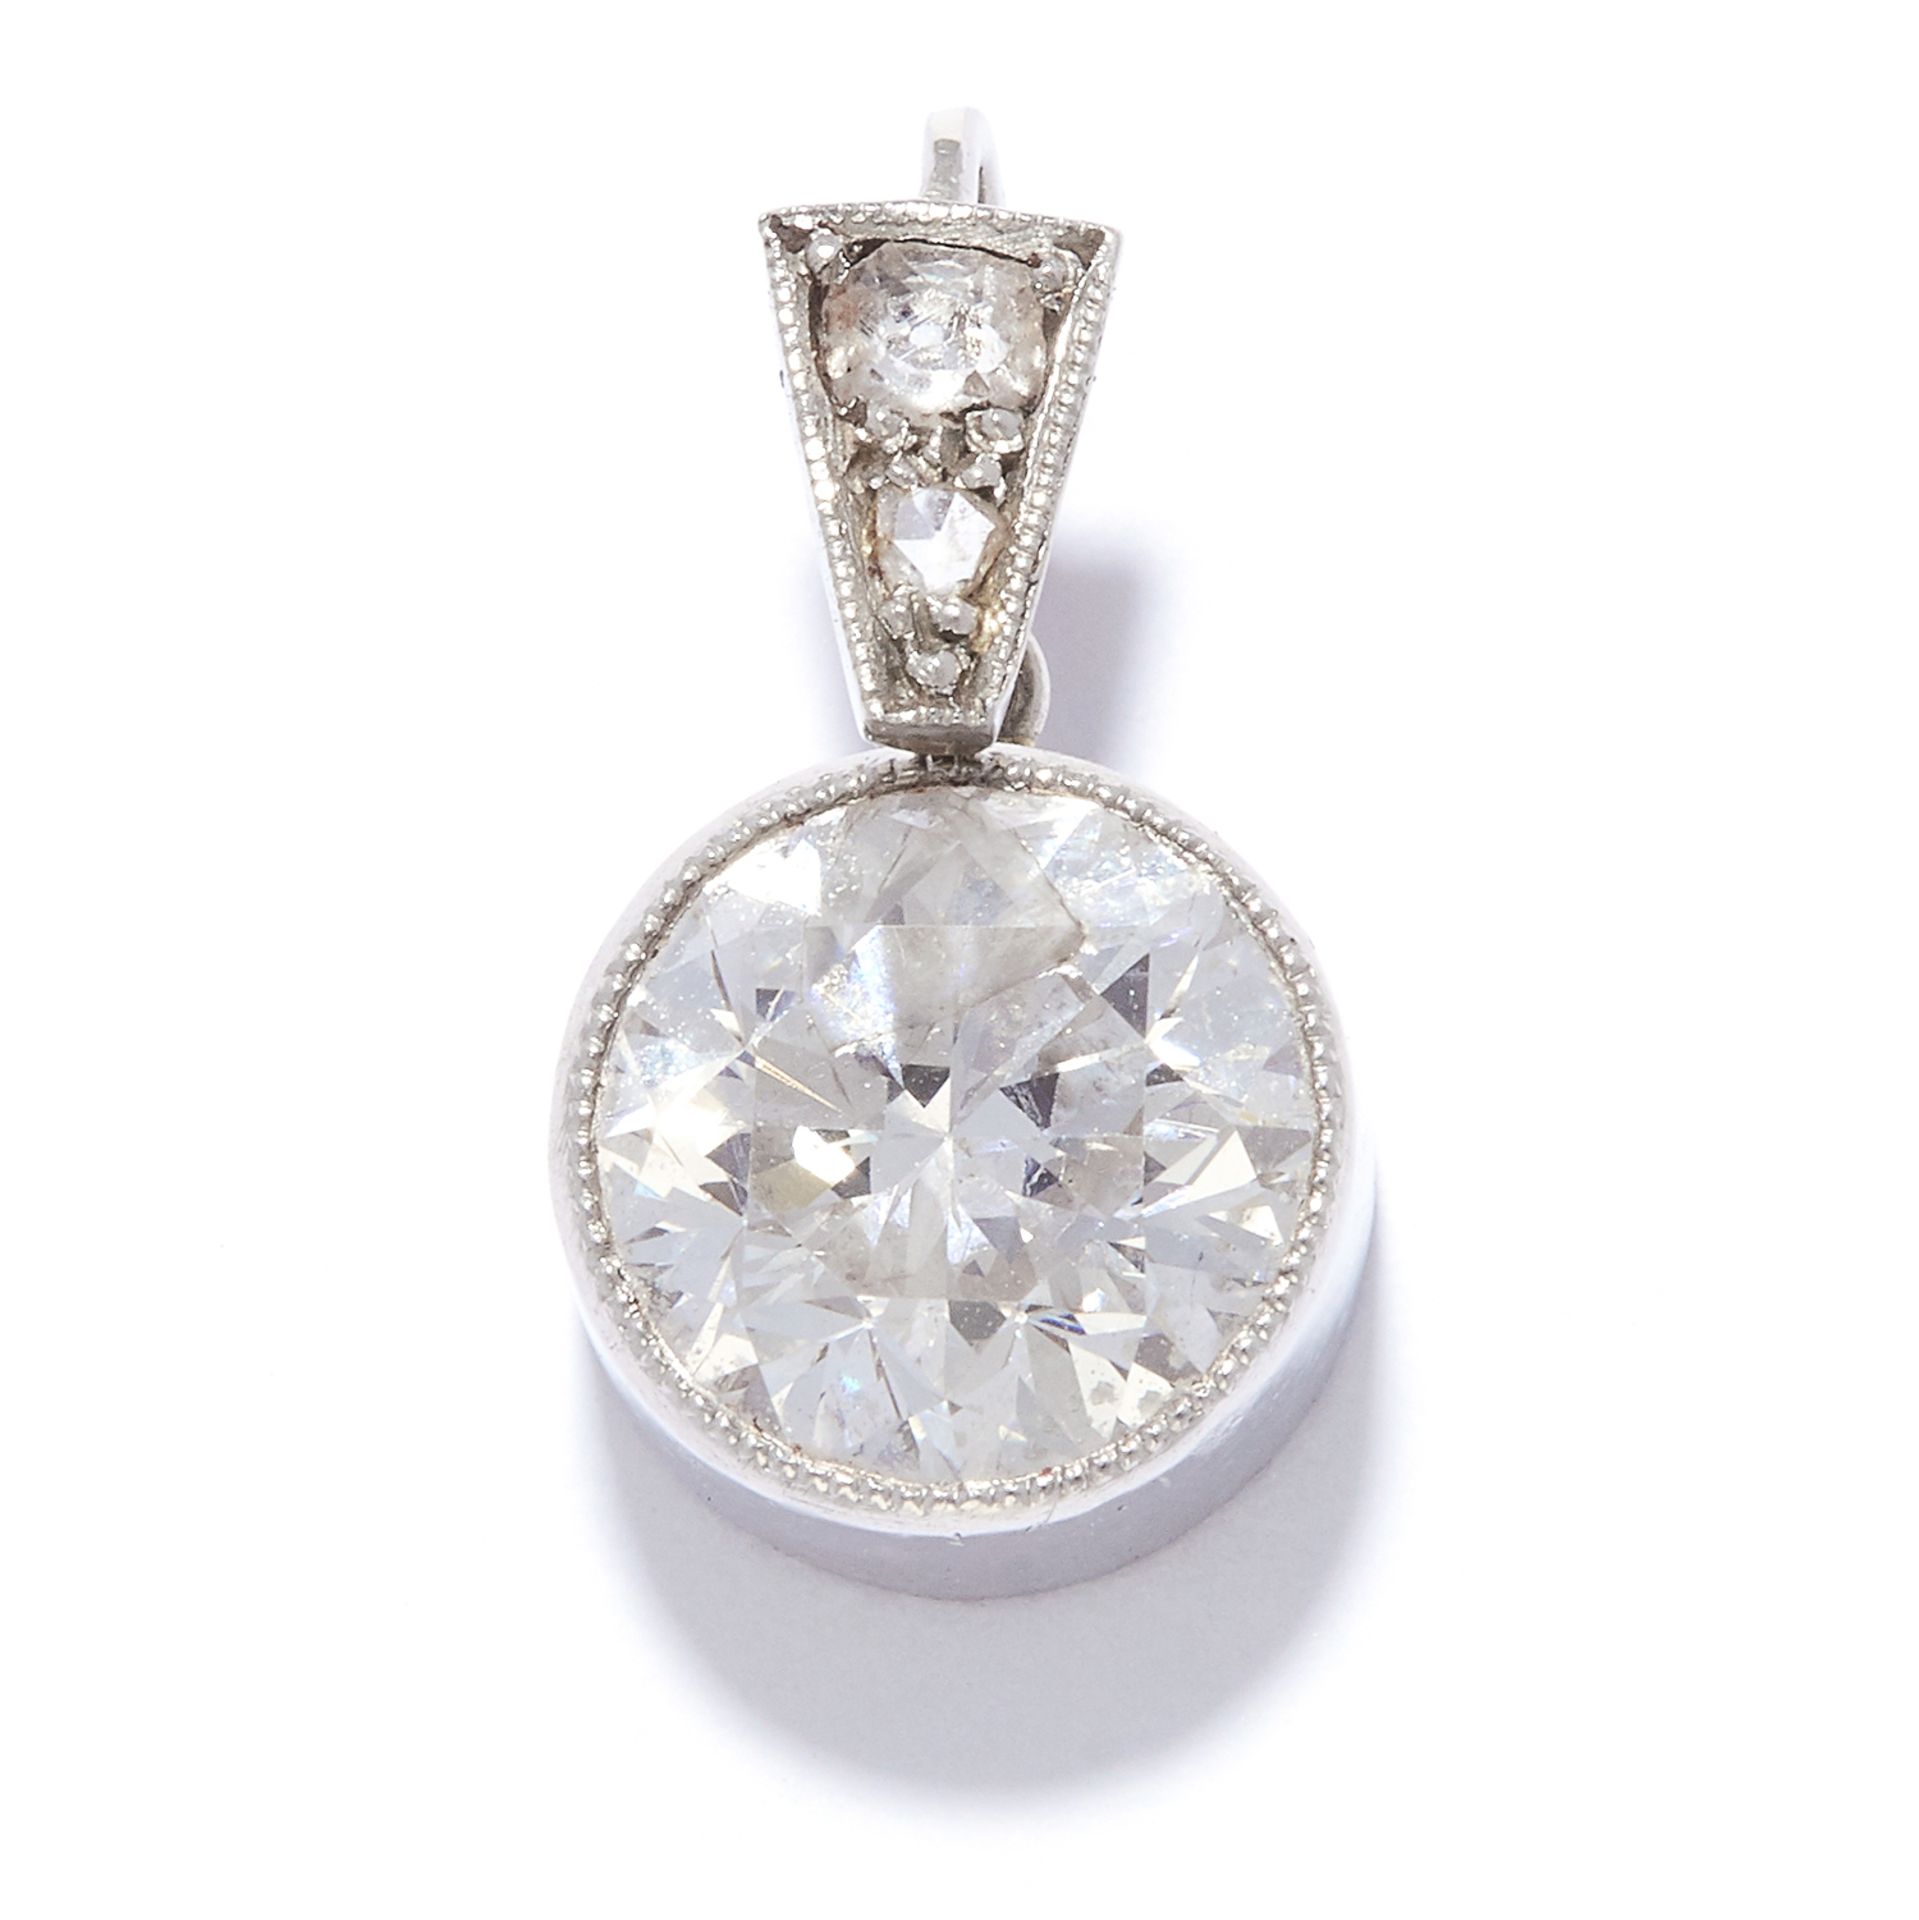 1.60 CARAT SOLITAIRE DIAMOND PENDANT in white gold or platinum, set with a round cut diamond of